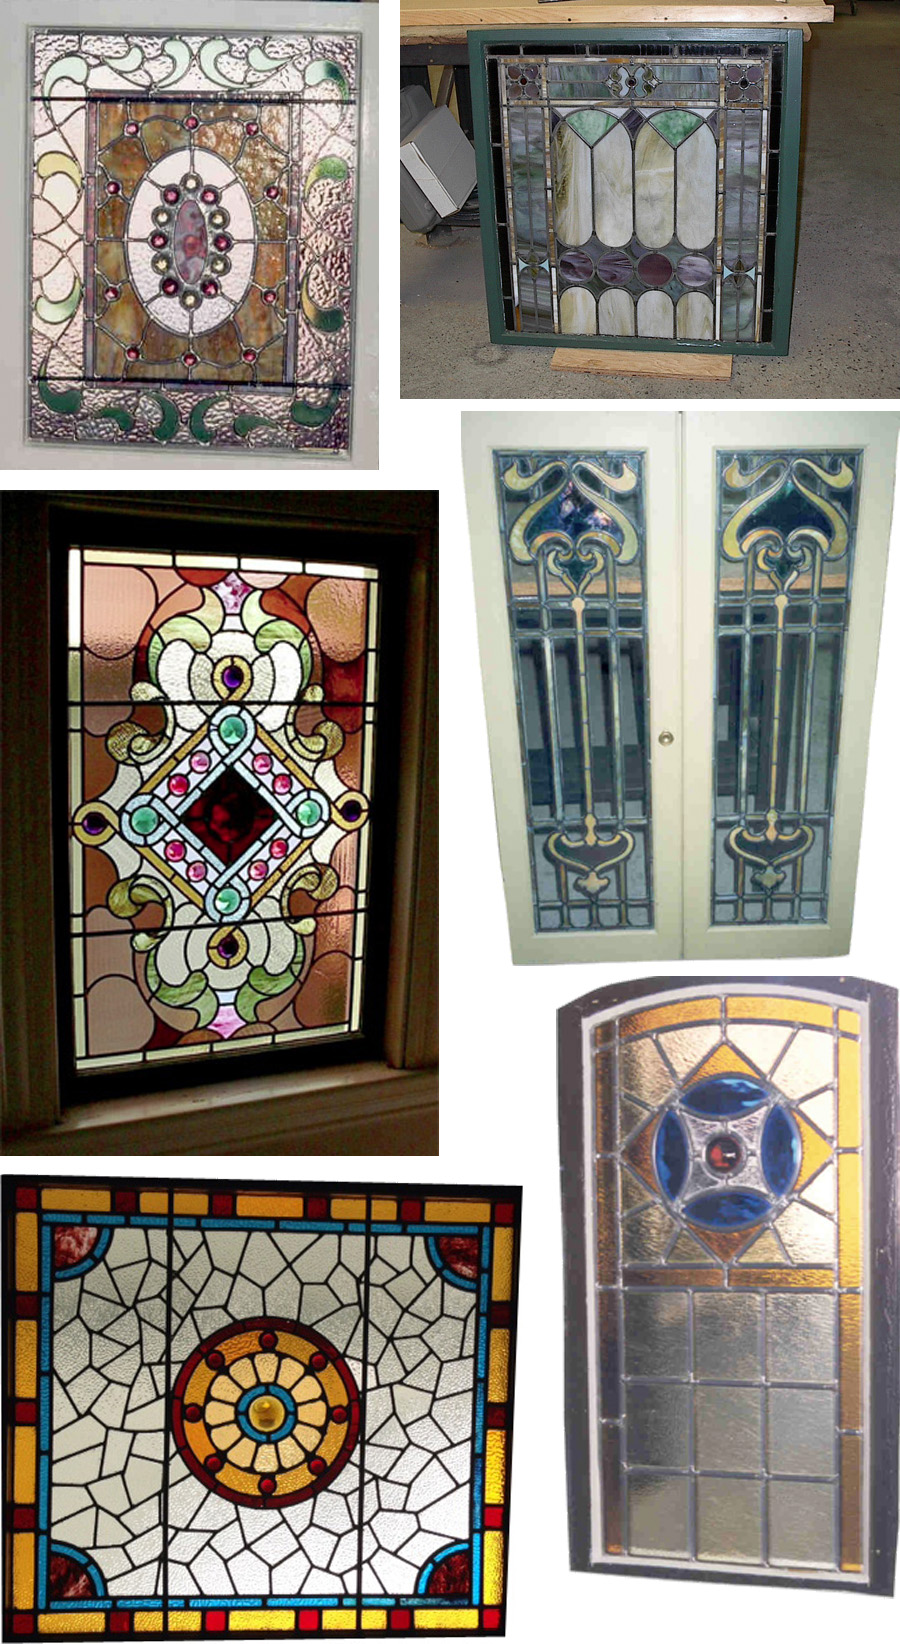 Six formerly damaged stained glass pieces, all expertly restored.